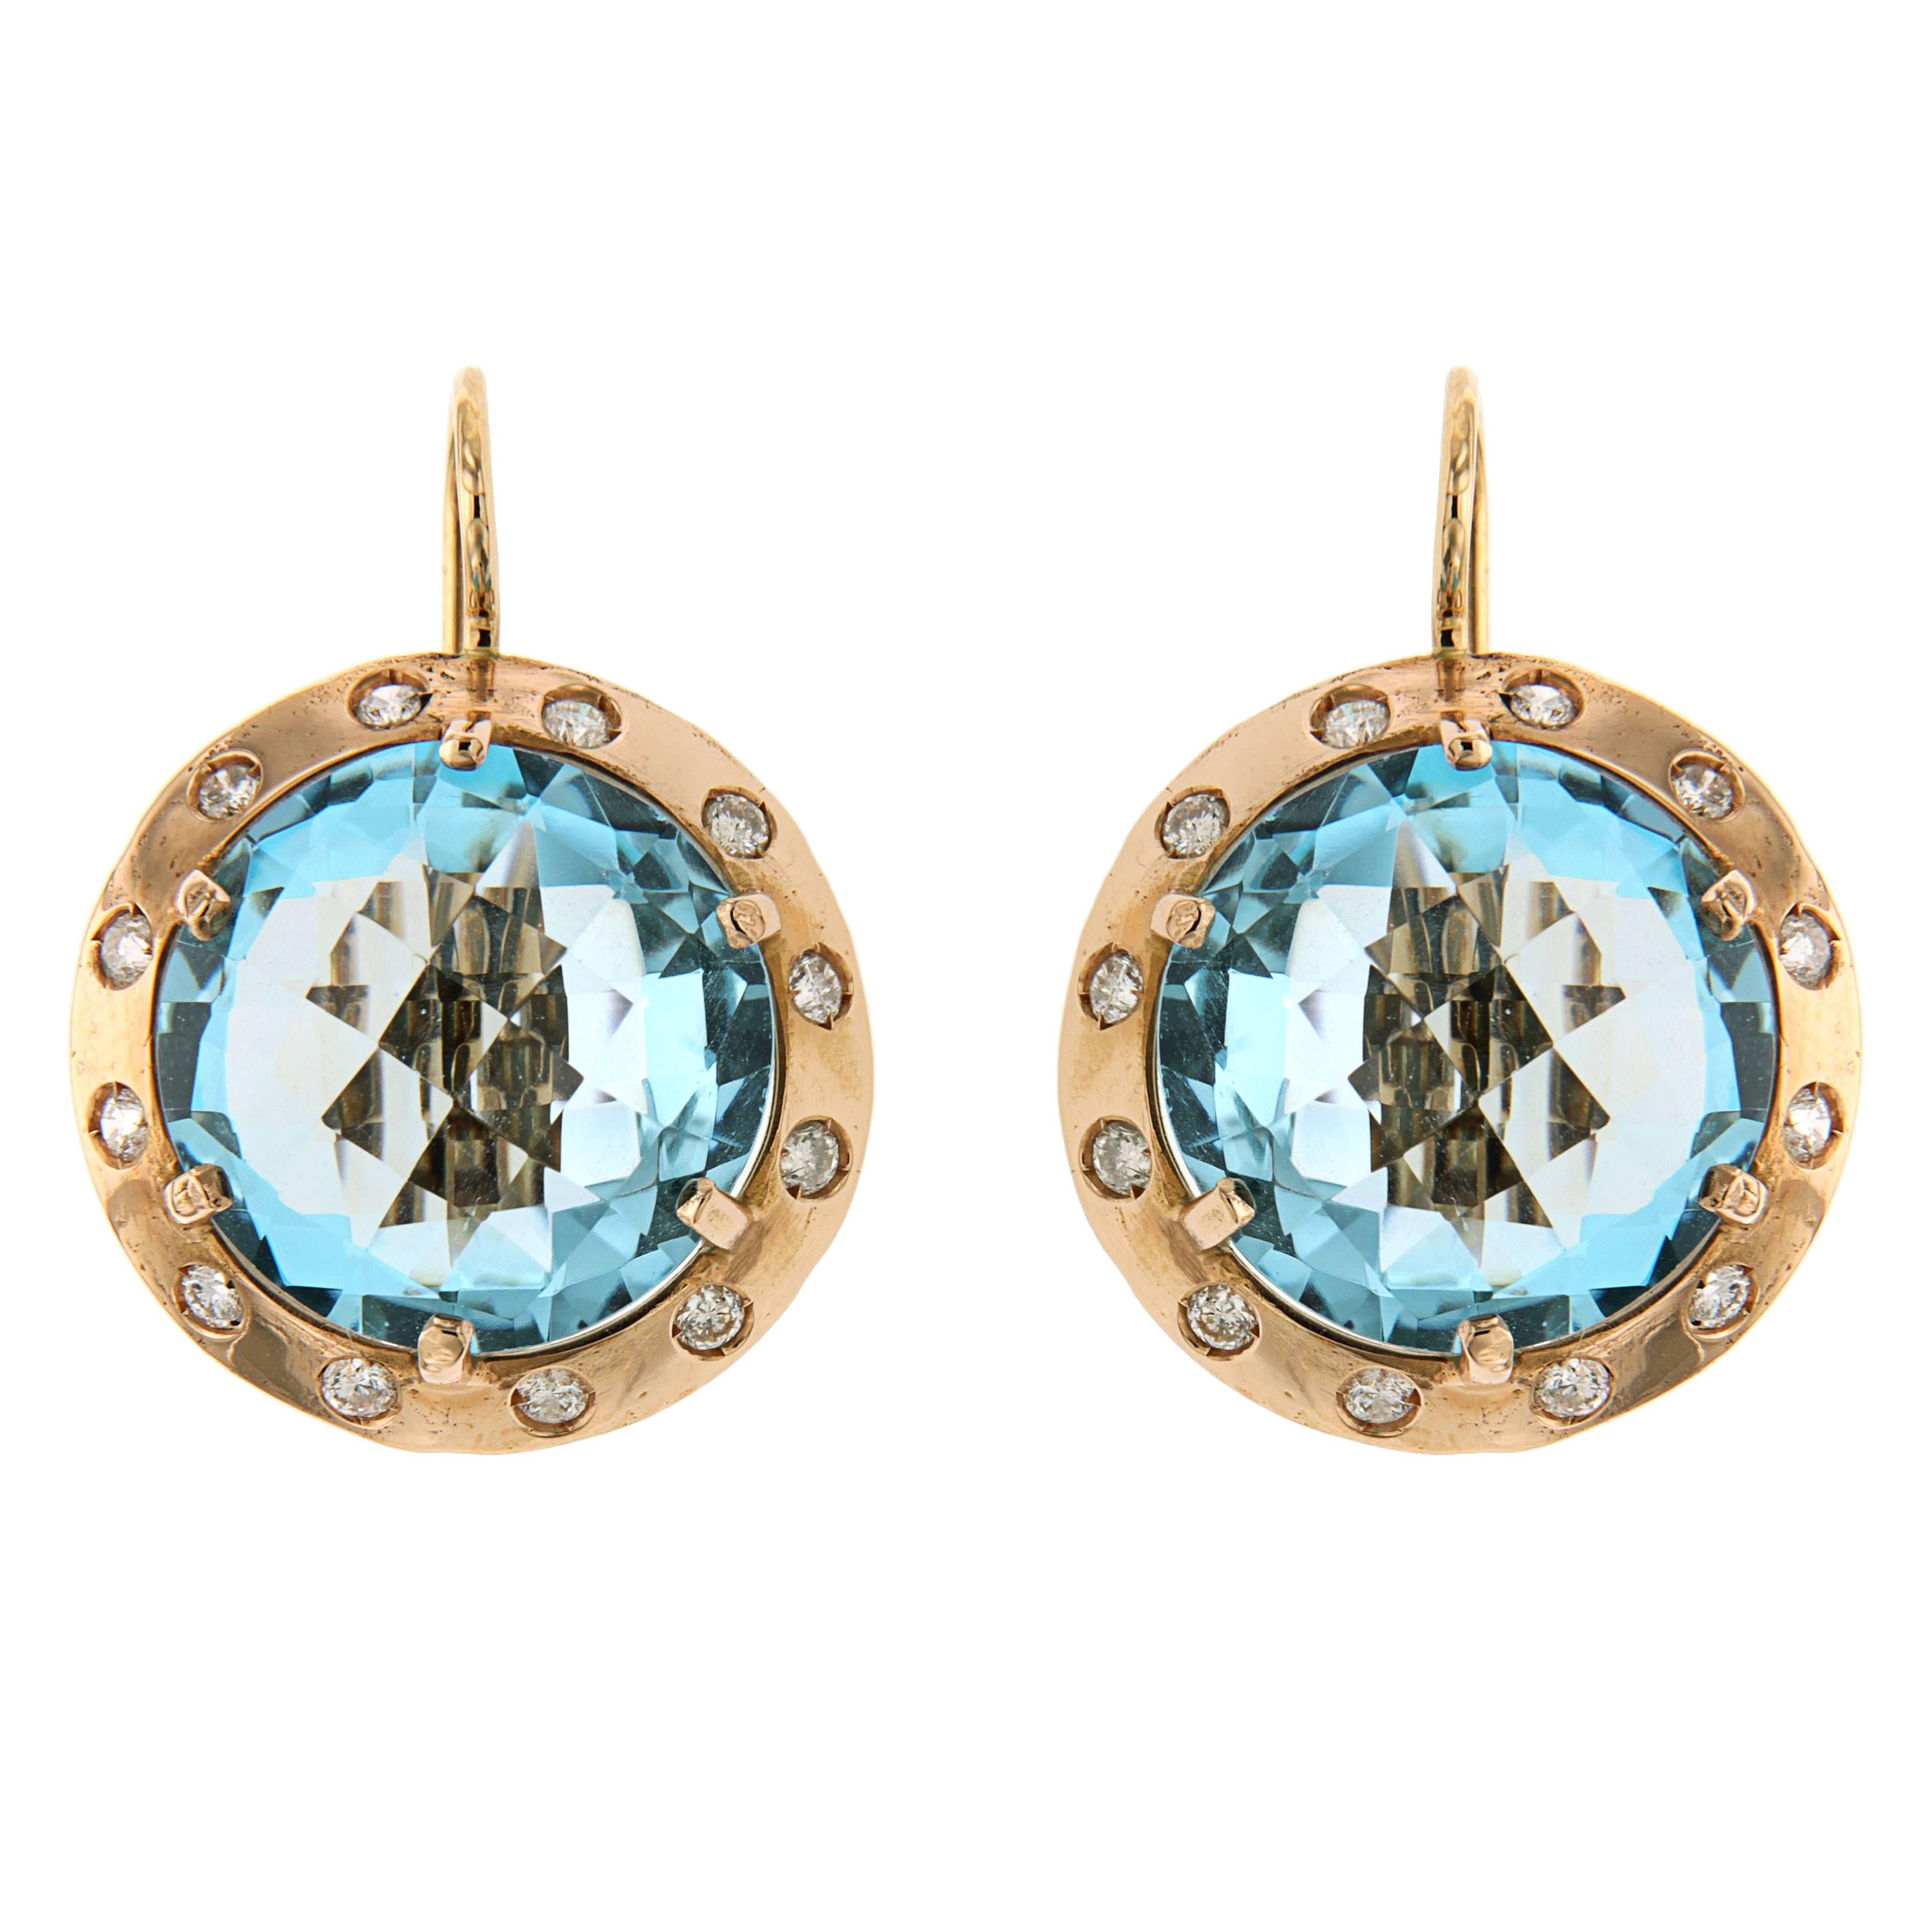 Blue Topaz Diamonds Rose Gold Earrings Handcrafted in Italy